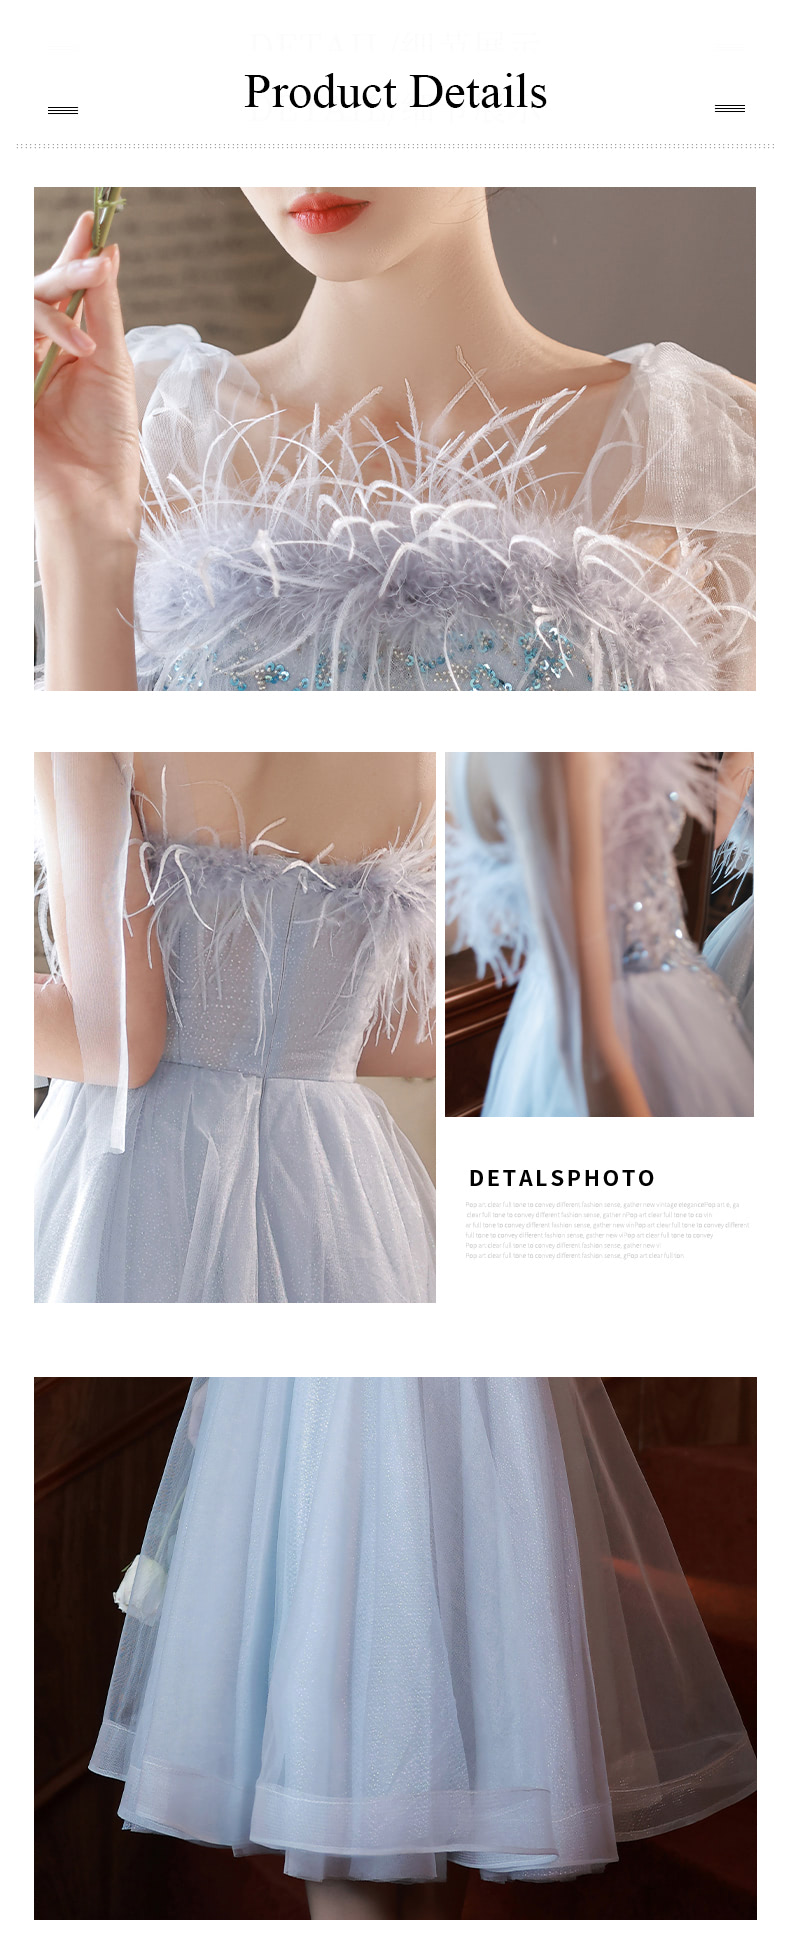 Feather-Cocktail-Party-Evening-Dress-Blue-Formal-Ball-Gown18.jpg